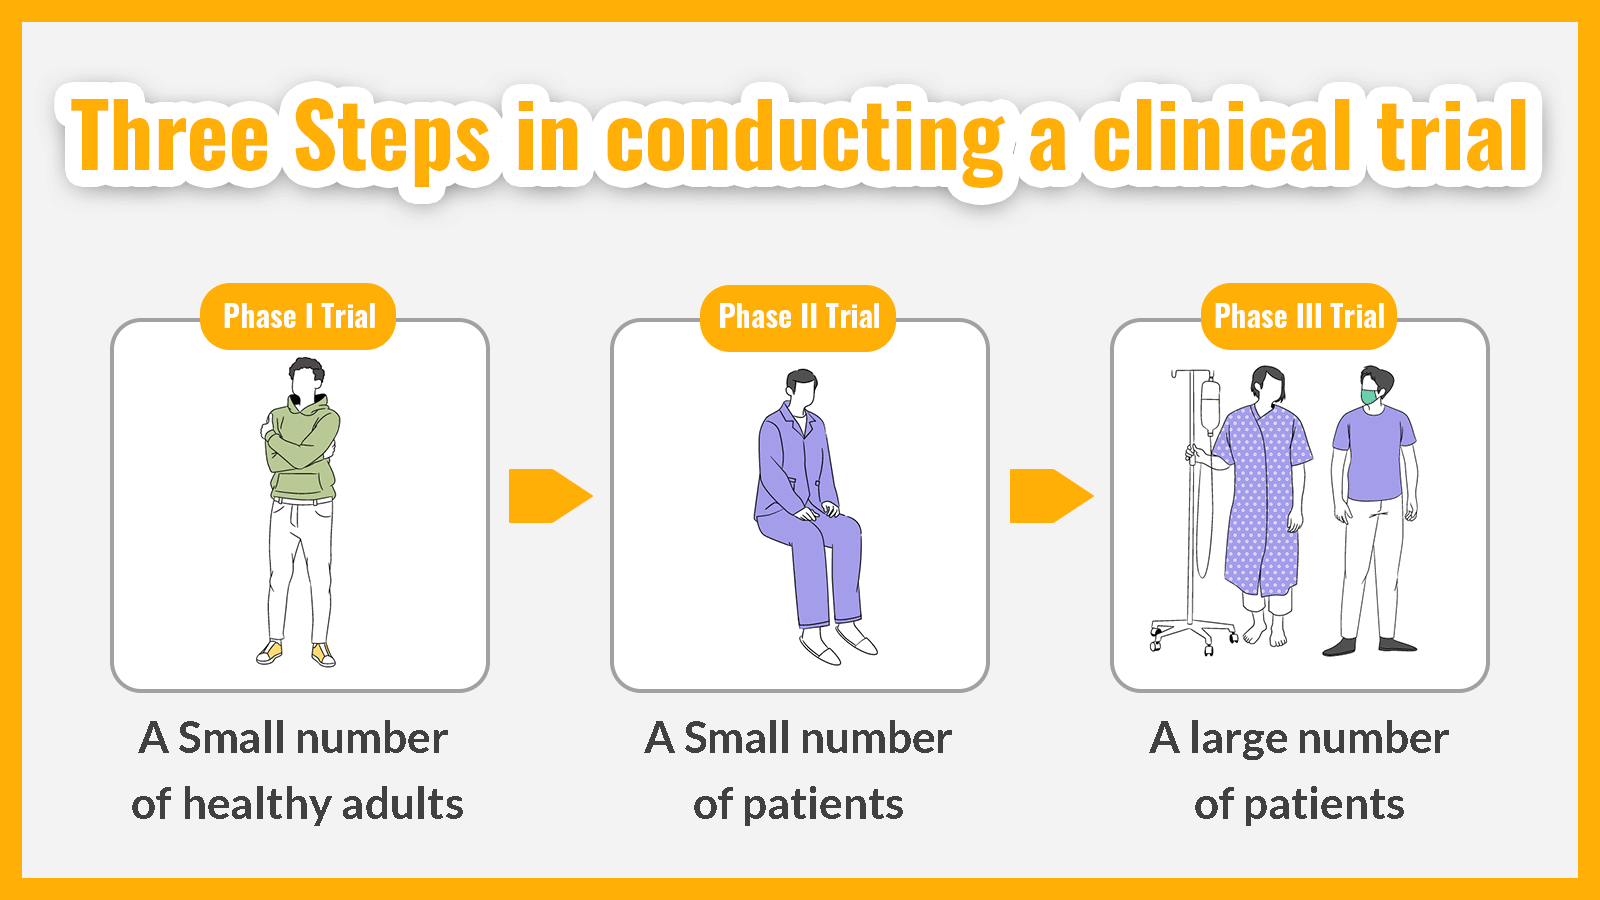 Three Steps in conducting a clinical trial